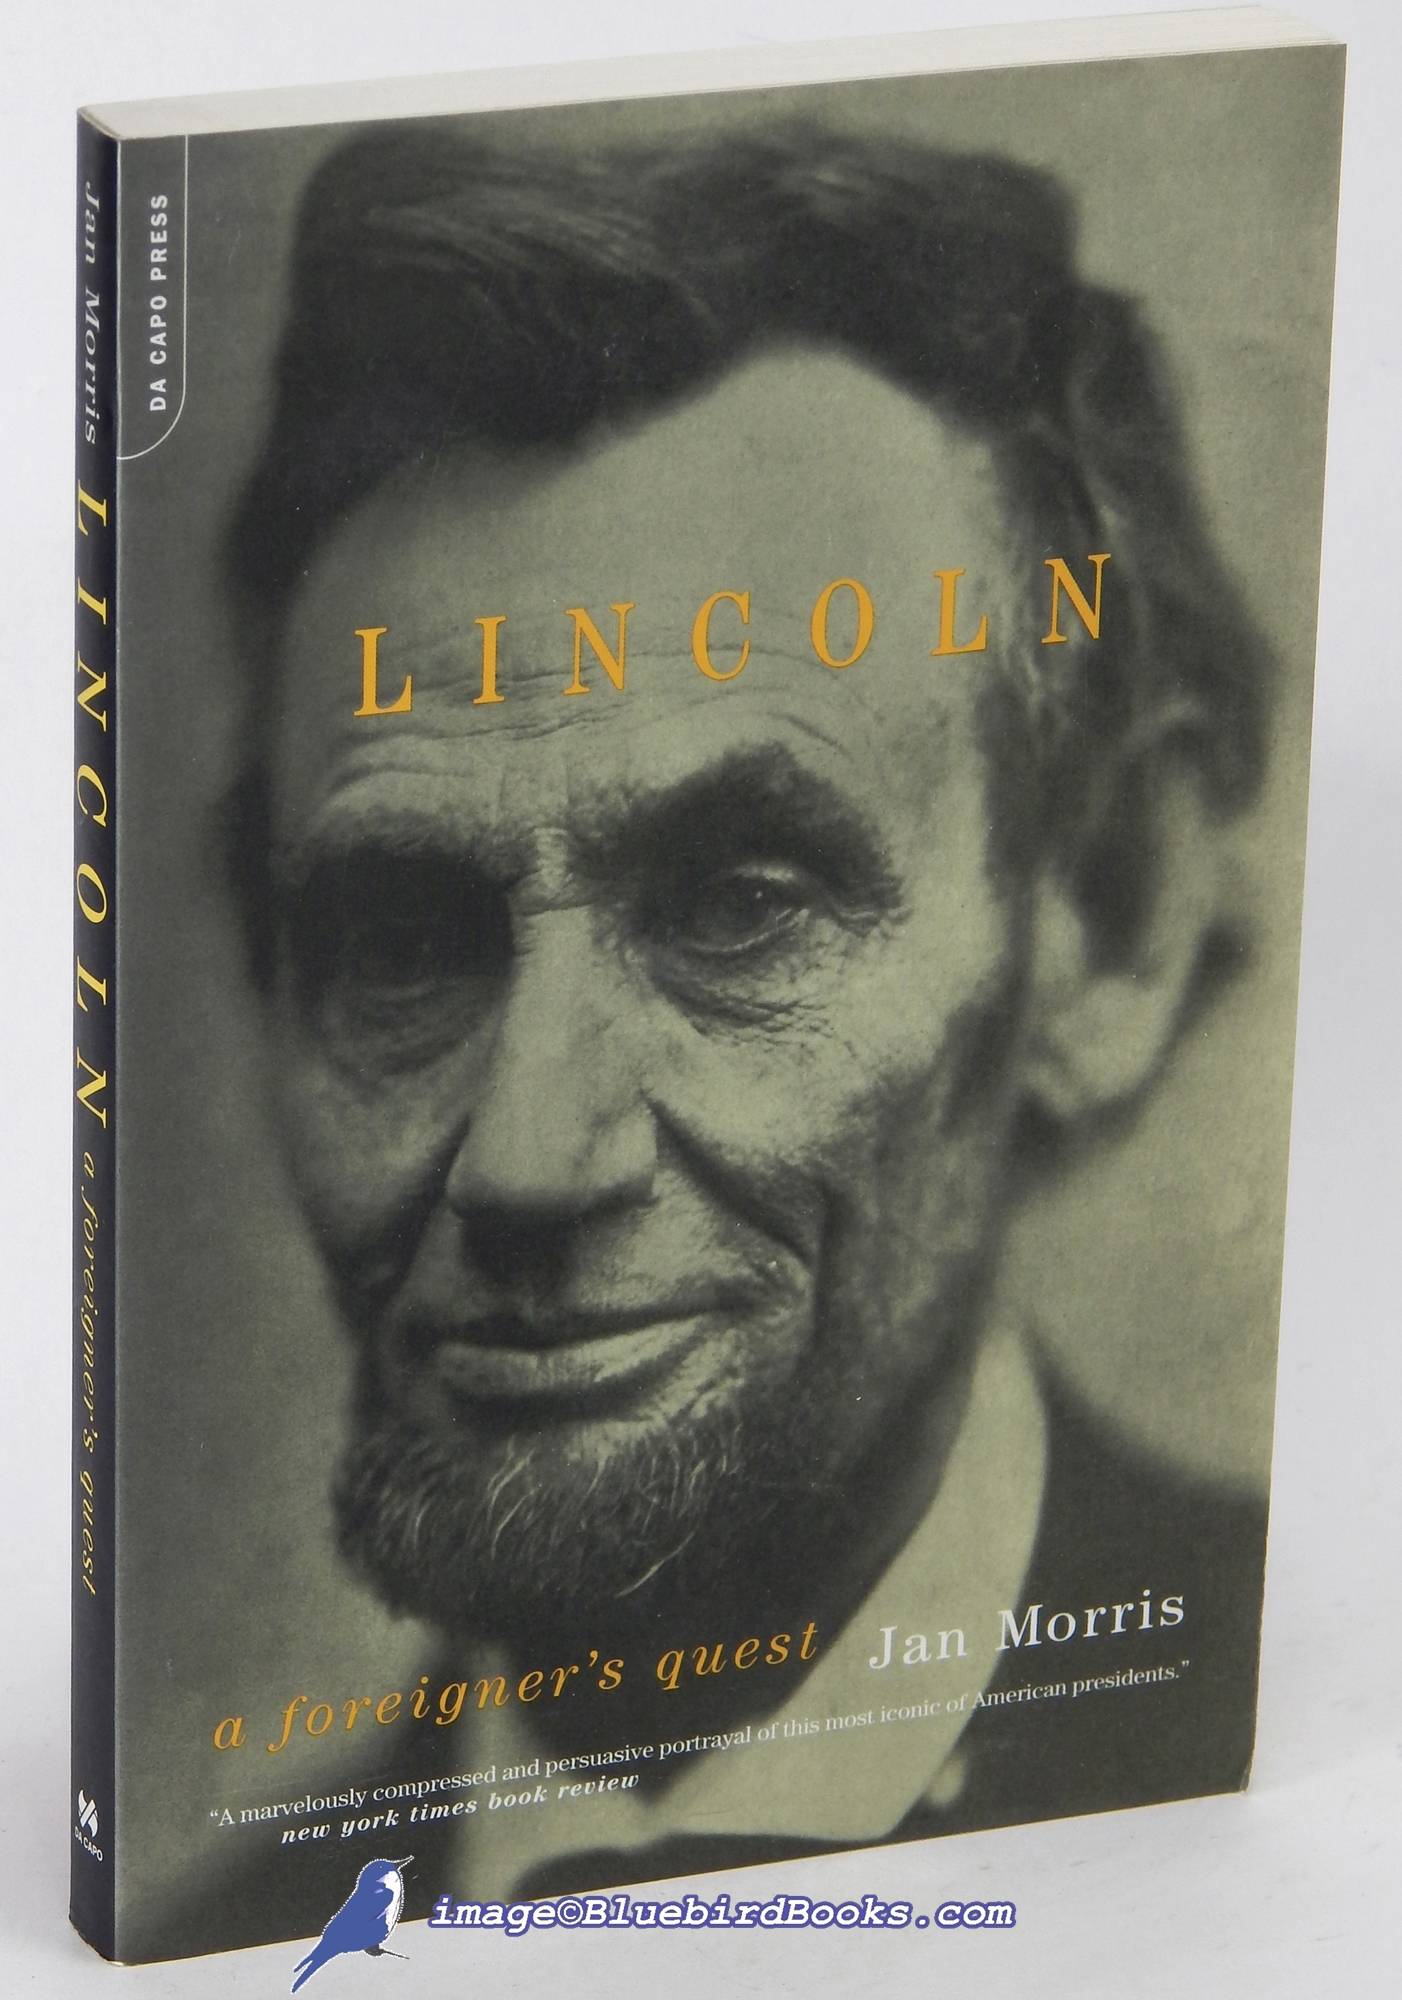 MORRIS, JAN - Lincoln: A Foreigner's Quest